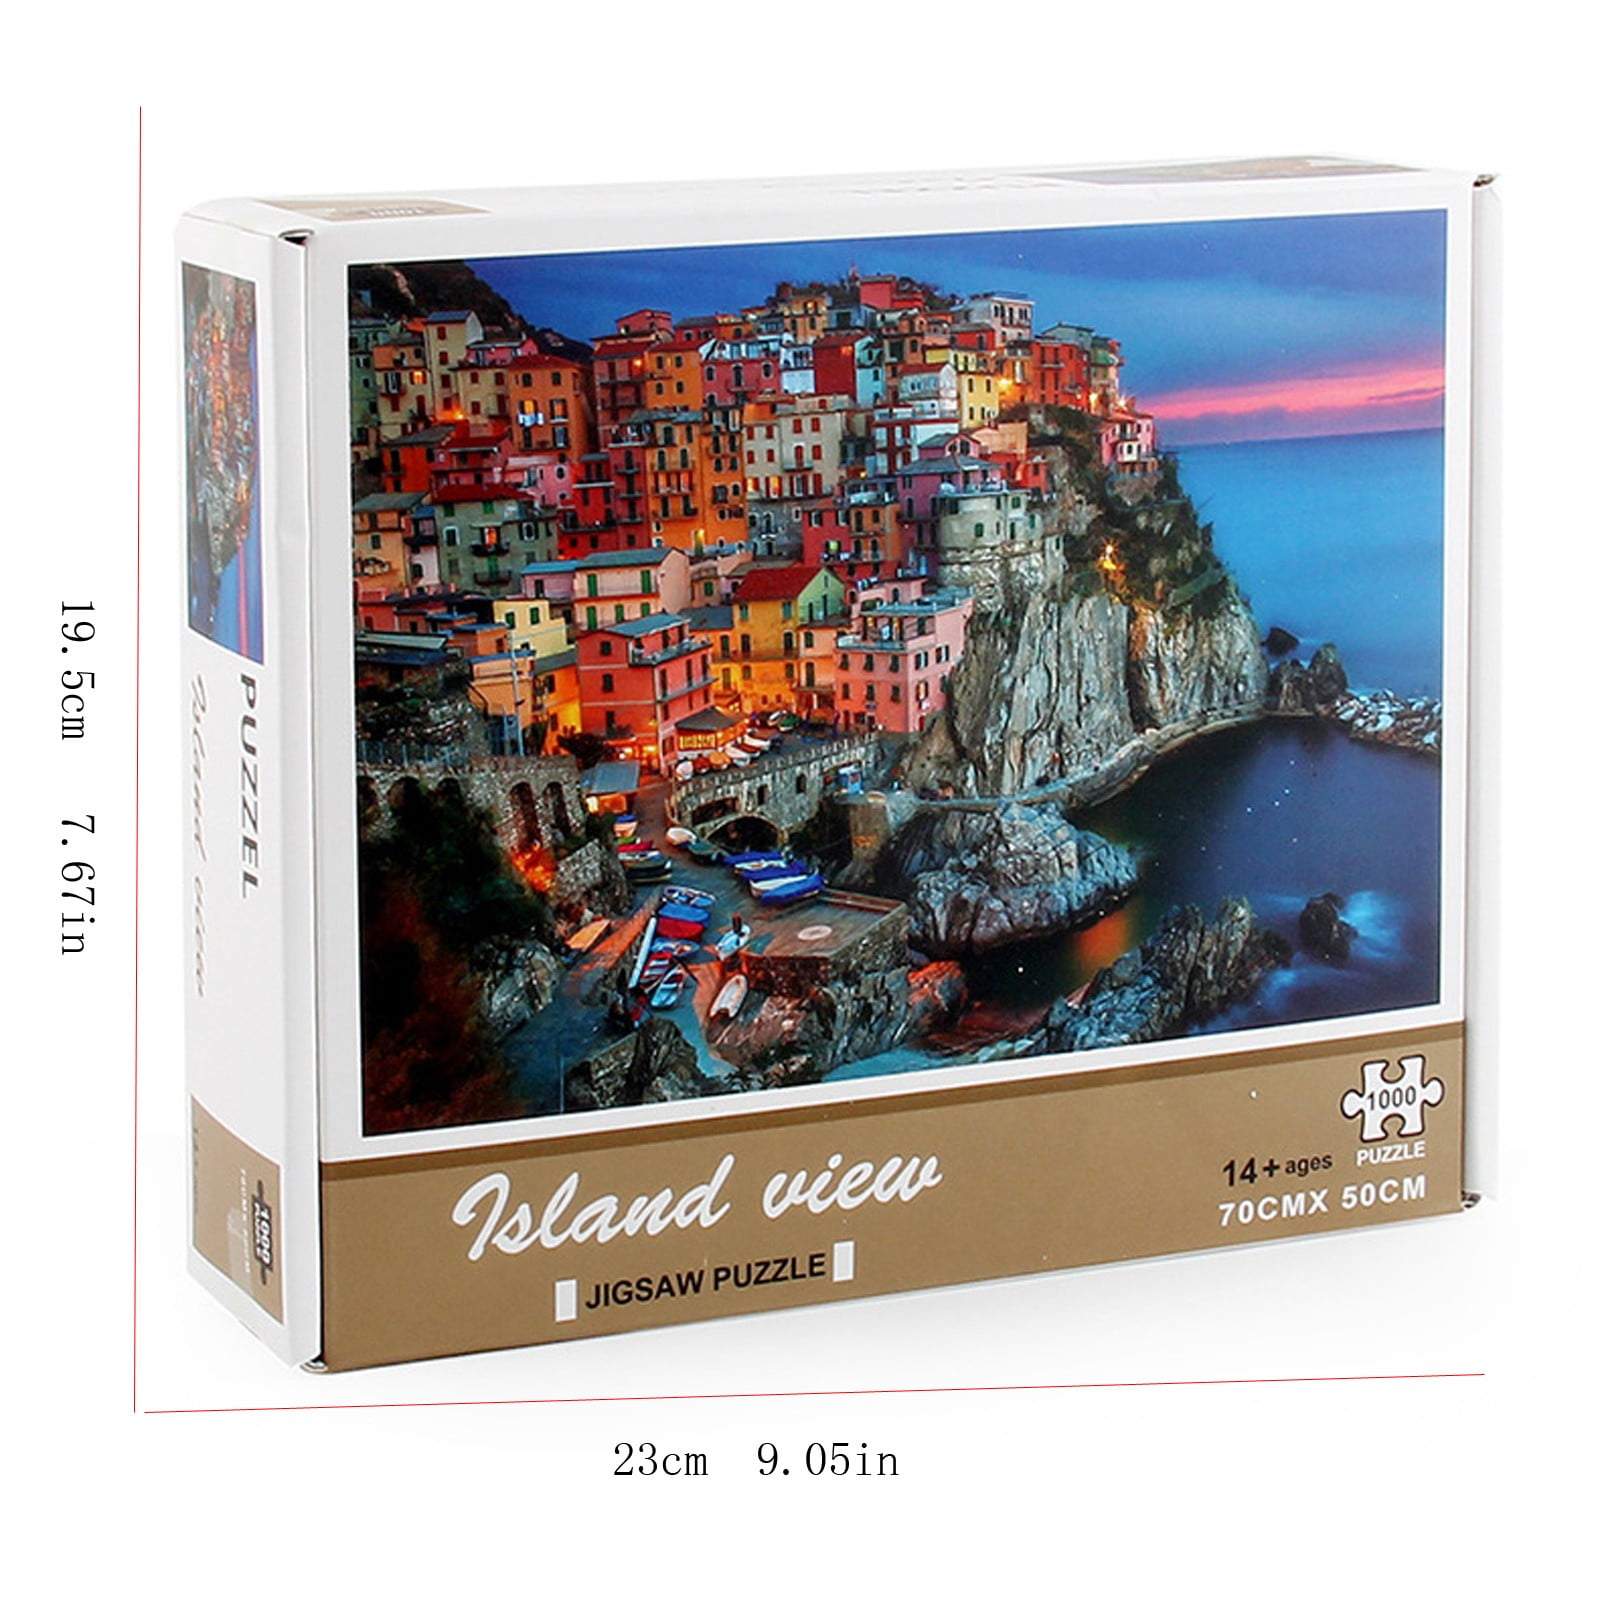 Landscape Jigsaw Puzzles 1000 Pieces for Adult,Entertainment Wooden Puzzles Toys Big Wooden Jigsaw Puzzle Toys for Family Games.-3000 Piece